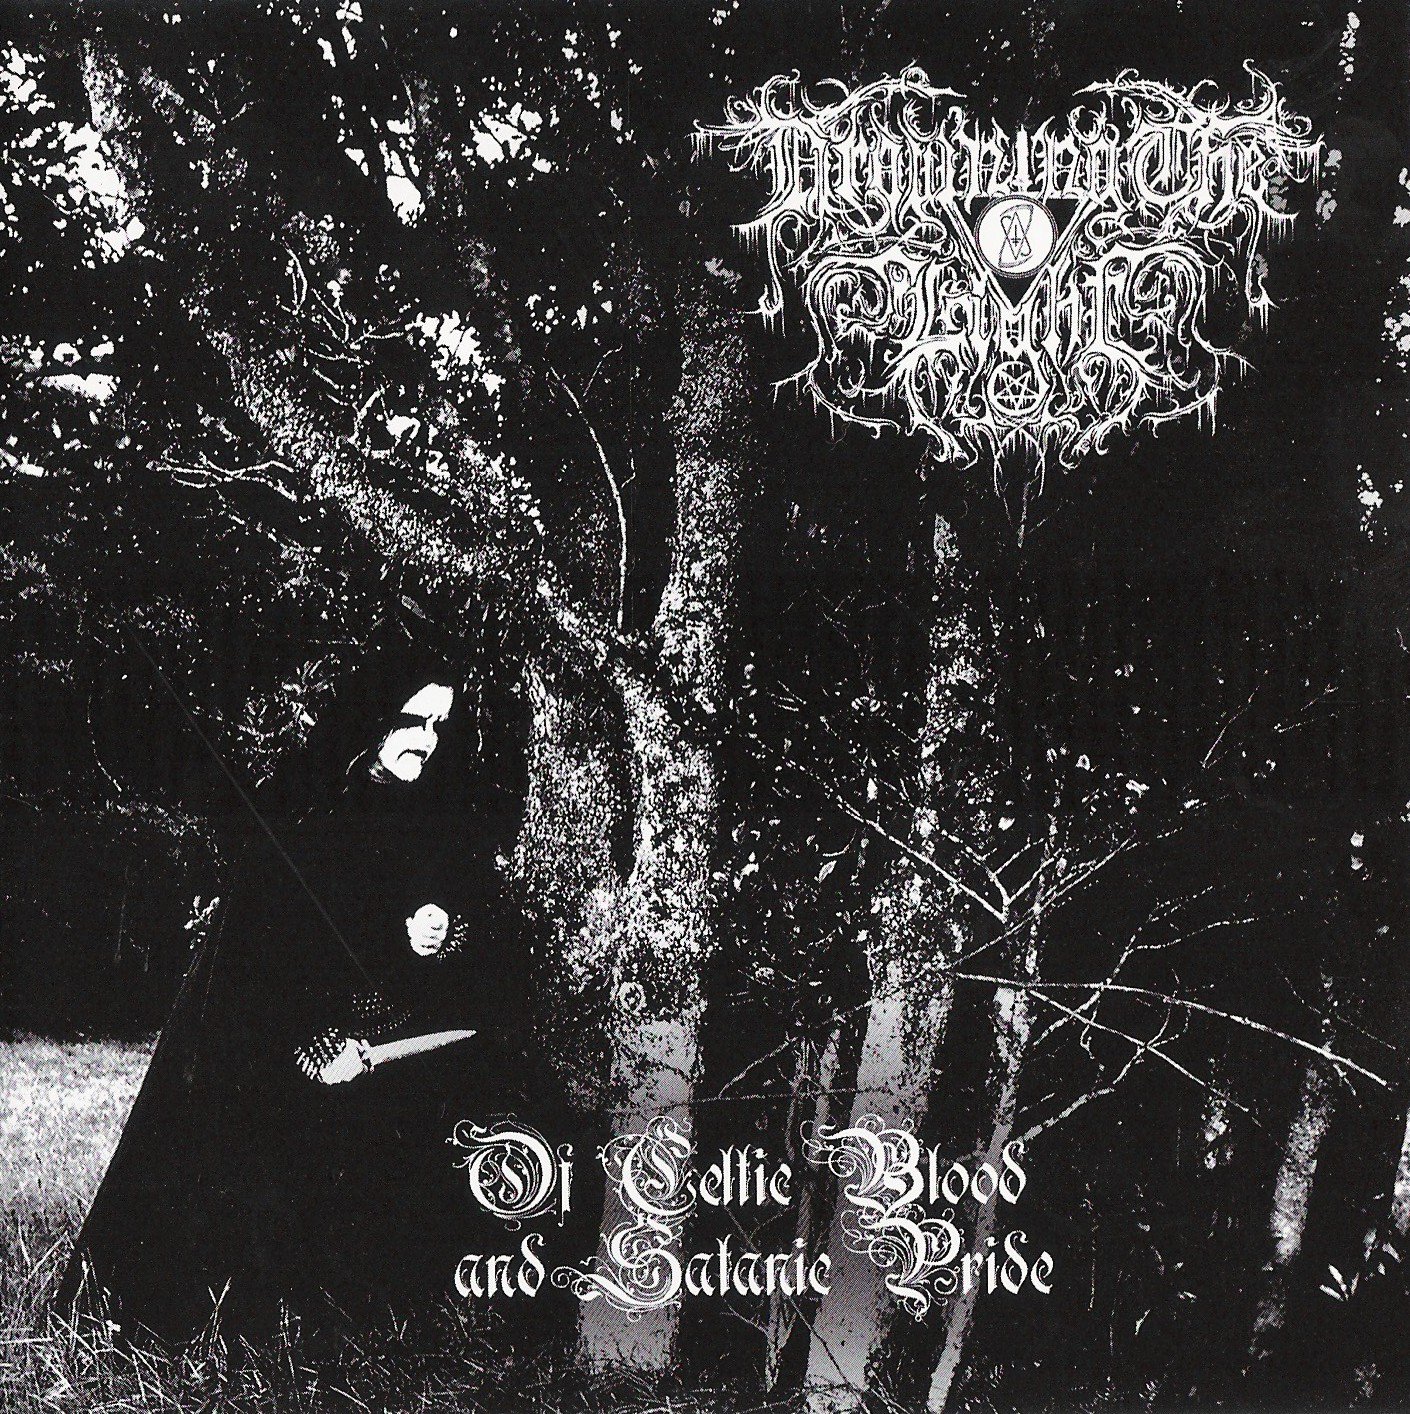 Drowning the light. Drowning the Light - of Celtic Blood and Satanic Pride (2007). Celtic Blood - Celtic Blood. Drowning the Light Drowned.